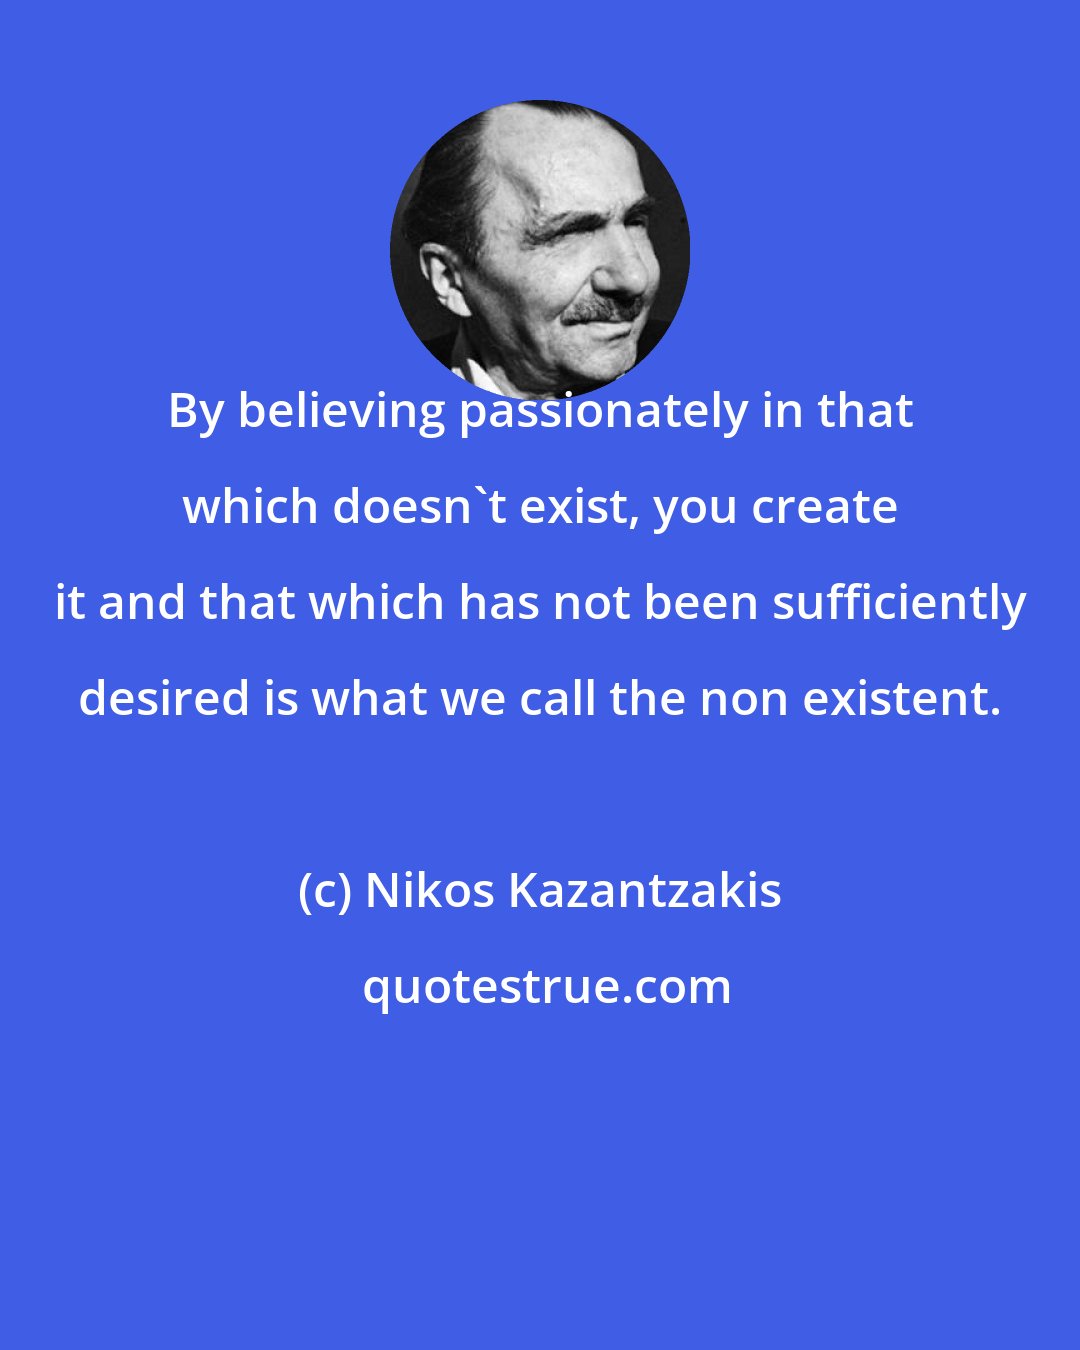 Nikos Kazantzakis: By believing passionately in that which doesn't exist, you create it and that which has not been sufficiently desired is what we call the non existent.